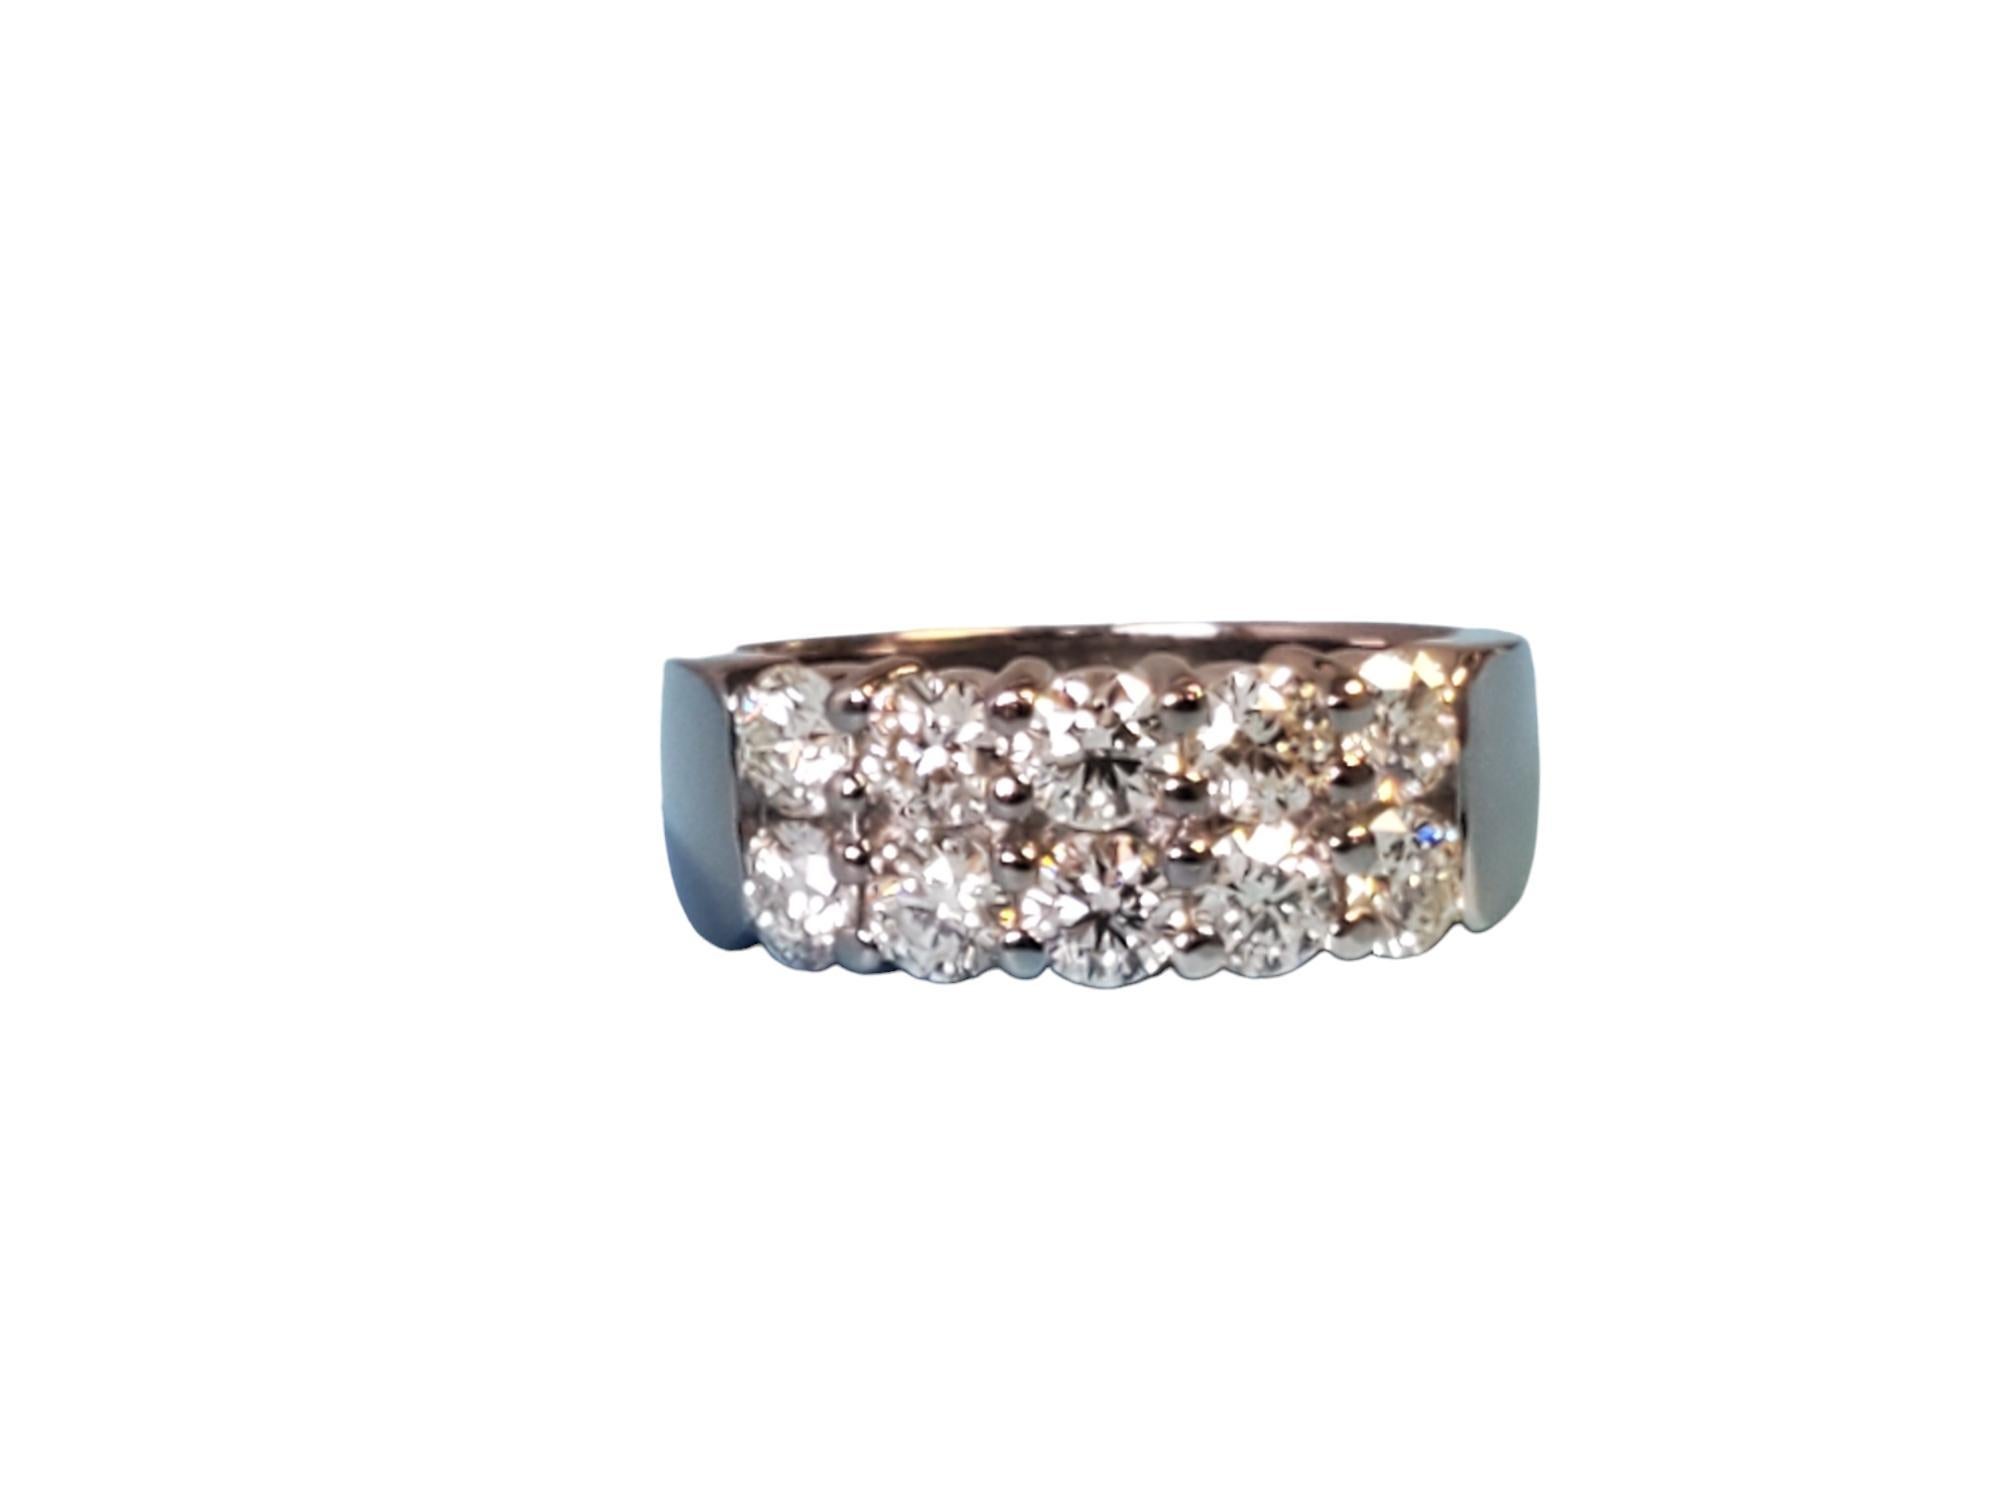 Estate HOF (Hearts on Fire) signed Enchantment 18k white gold 2 row diamond band 1.50tcw. HOF is known for amazing high quality diamonds and jewelry. Claim this gorgeous ring for yourself today. HOF is very high retail, comparable carat weight new